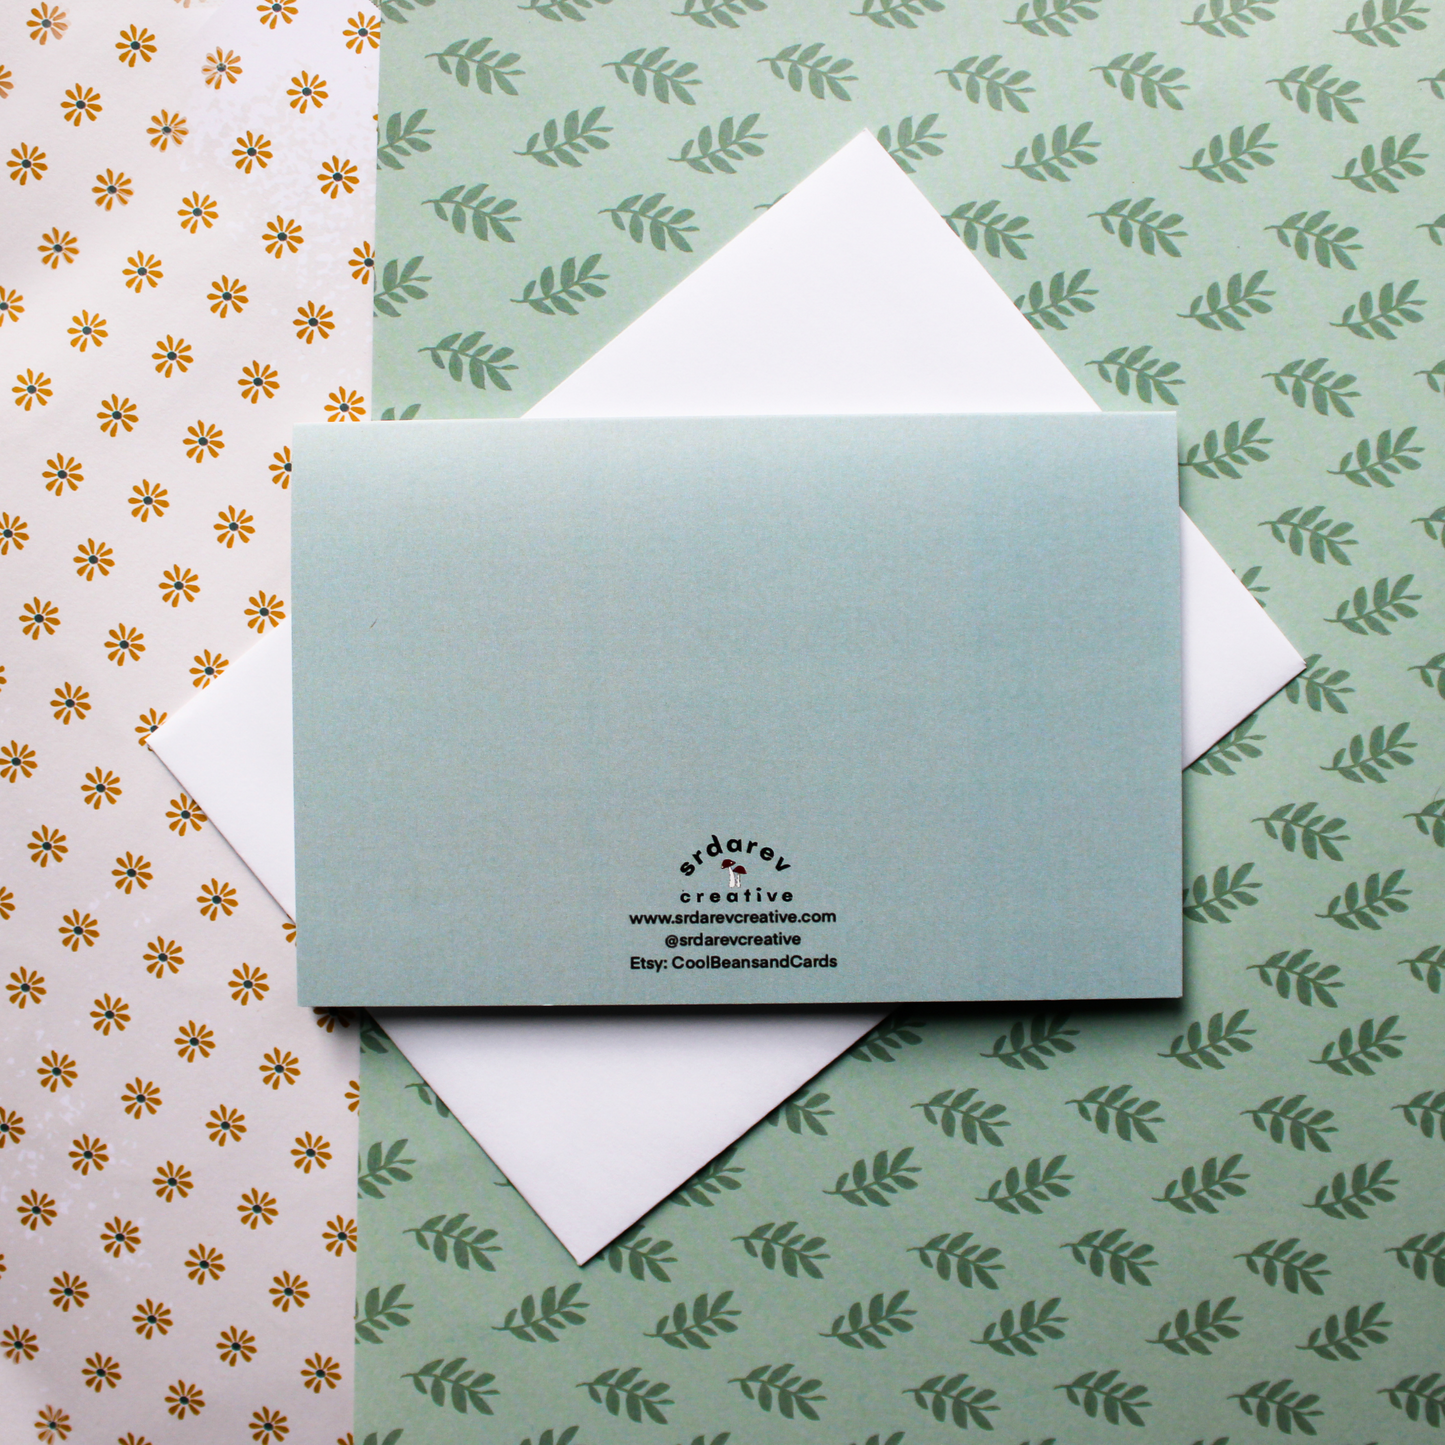 A light blue card on top of a white envelope with the "Srdarev Creative" logo on the back with mushrooms in the middle. "www.srdarevcreative.com" "@srdarevcreative". The background is a green leaf pattern and yellow floral pattern. 